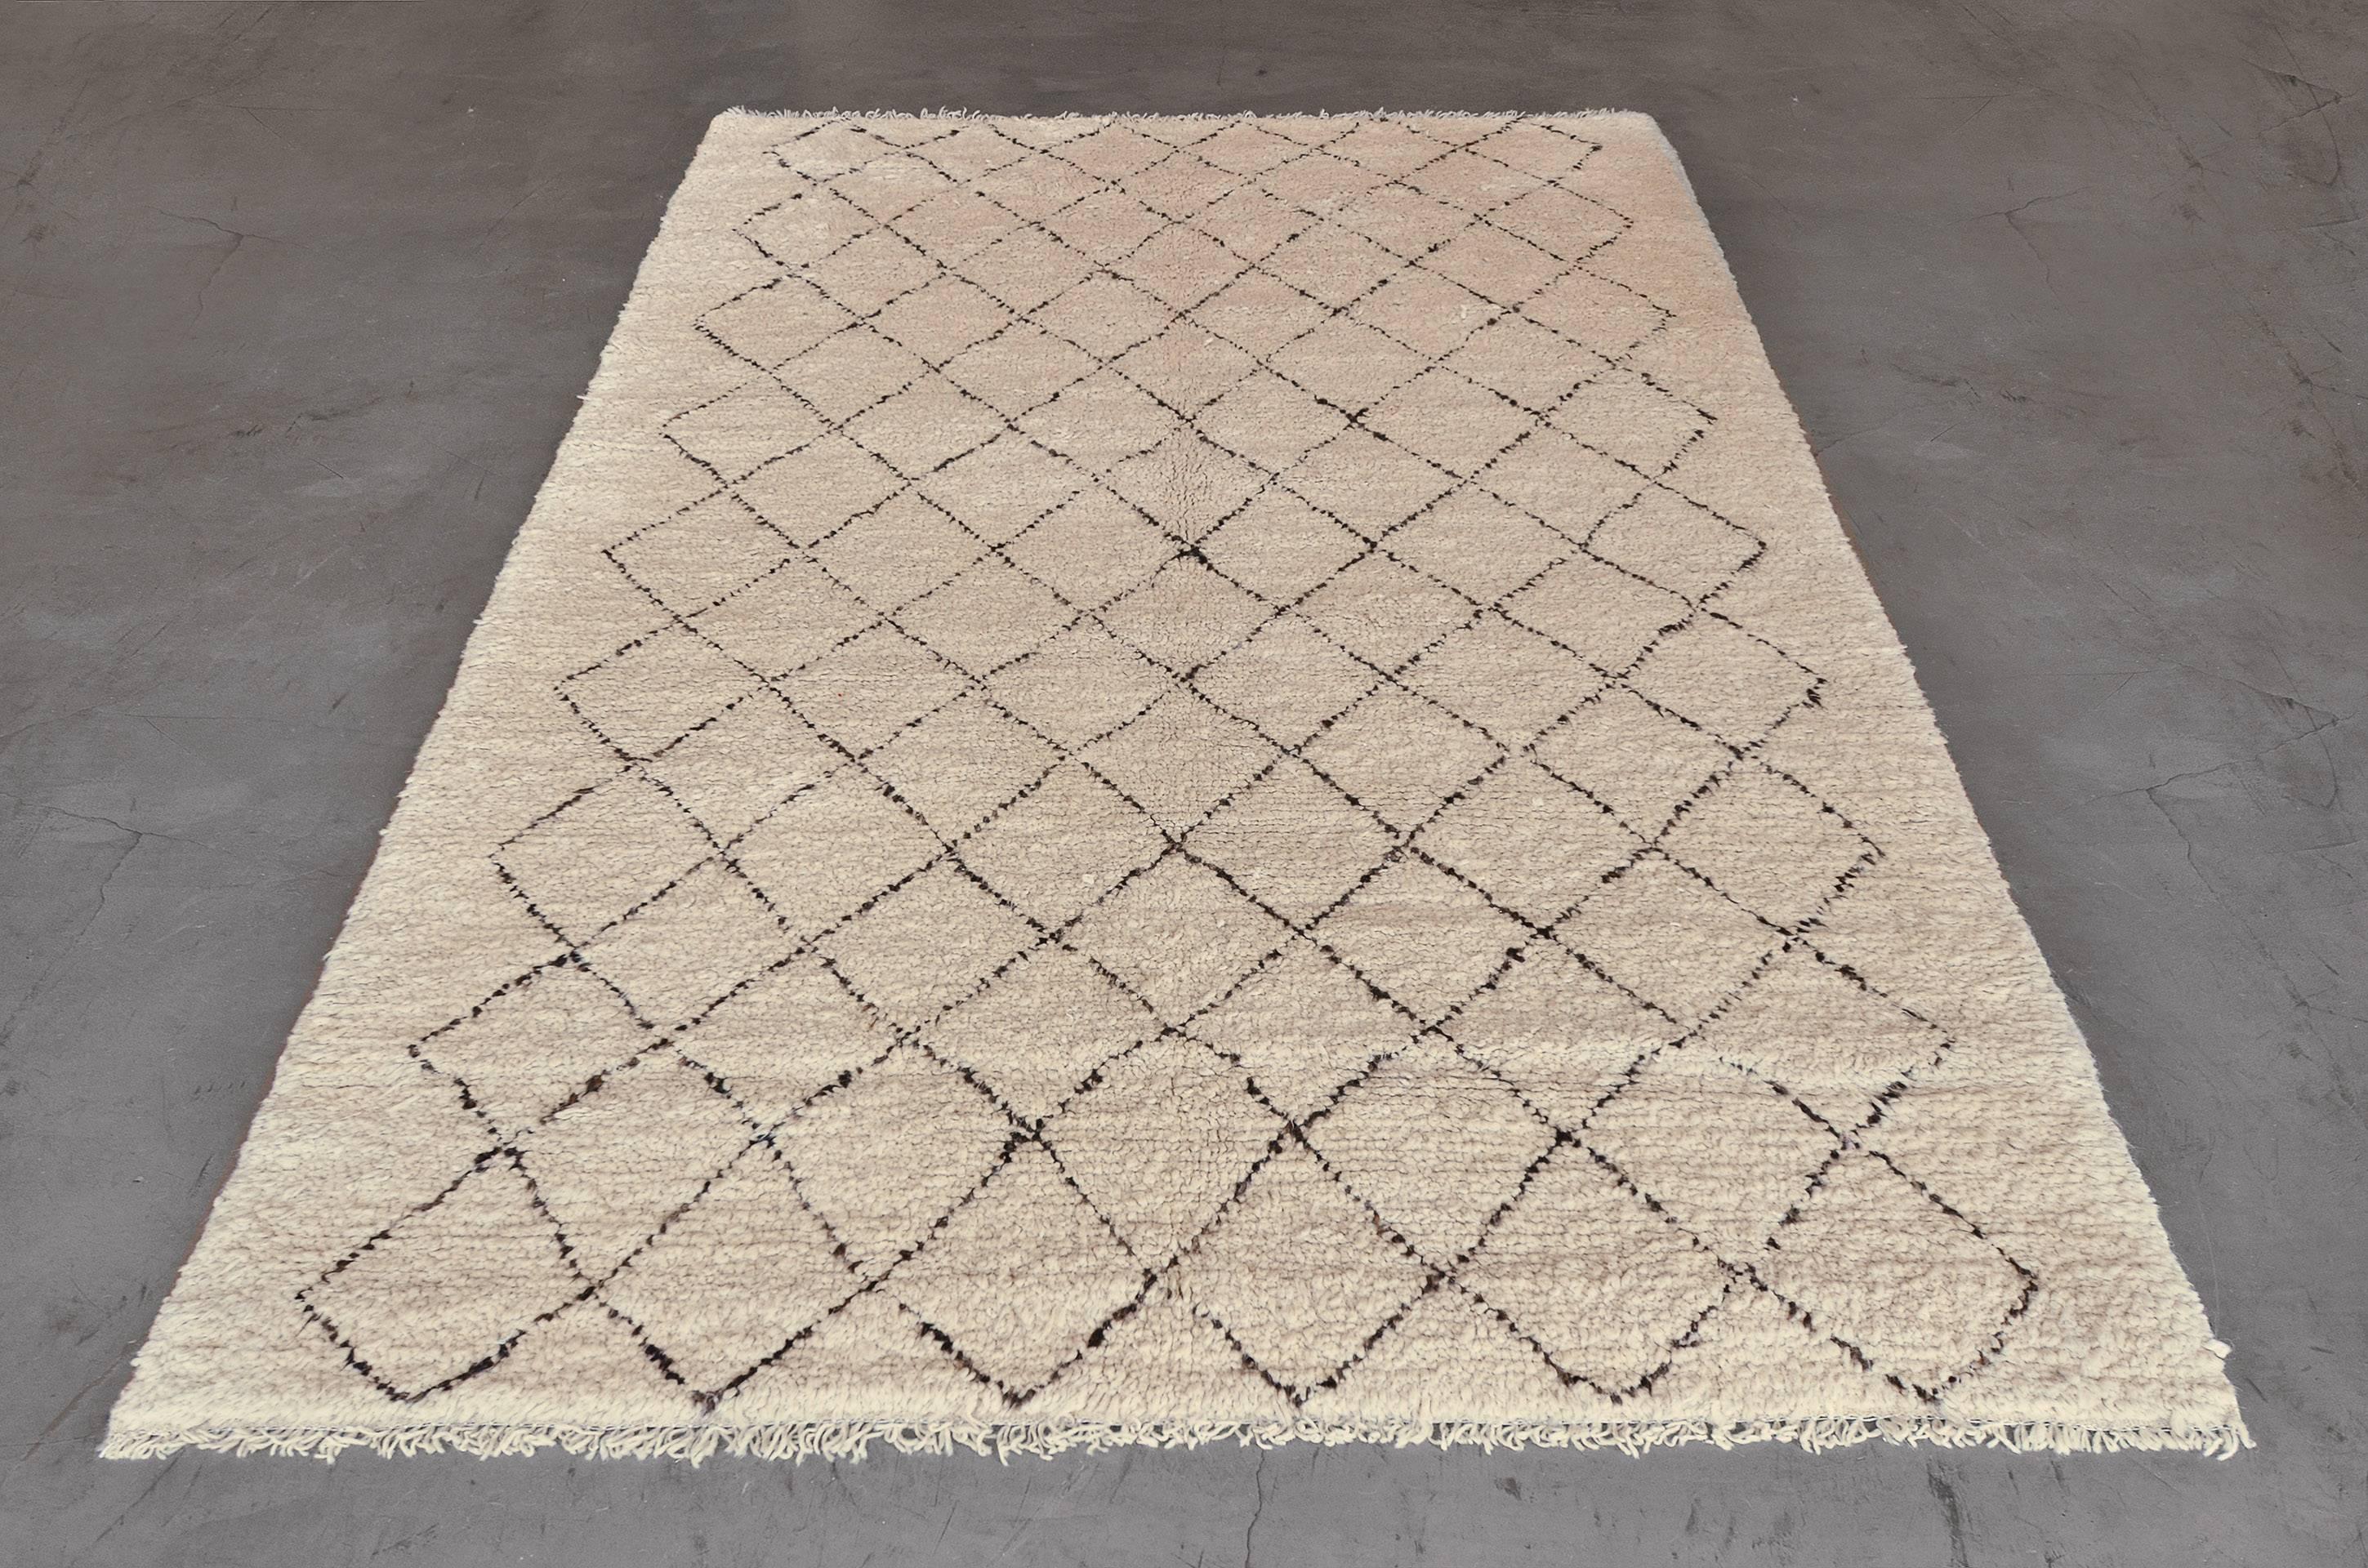 This vintage, 1970s, deep-pile, hand-woven Moroccan rug has an ivory field with a central panel of charcoal-black linked lozenges forming a lattice.